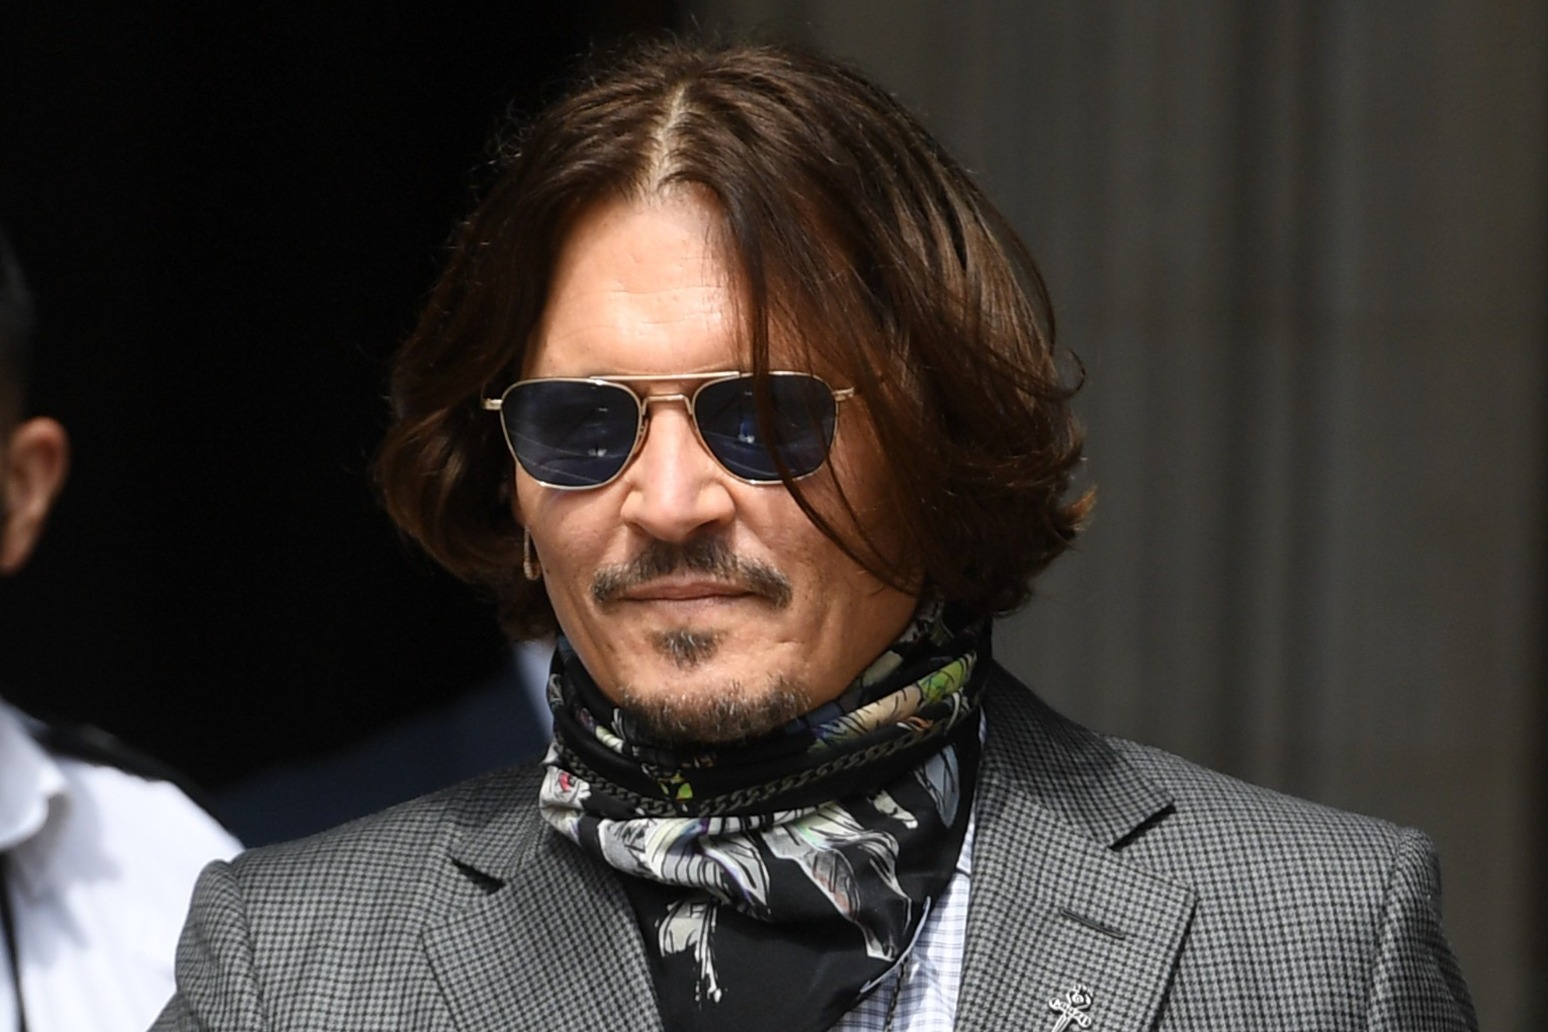 Johnny Depp lost nothing short of everything following abuse allegations